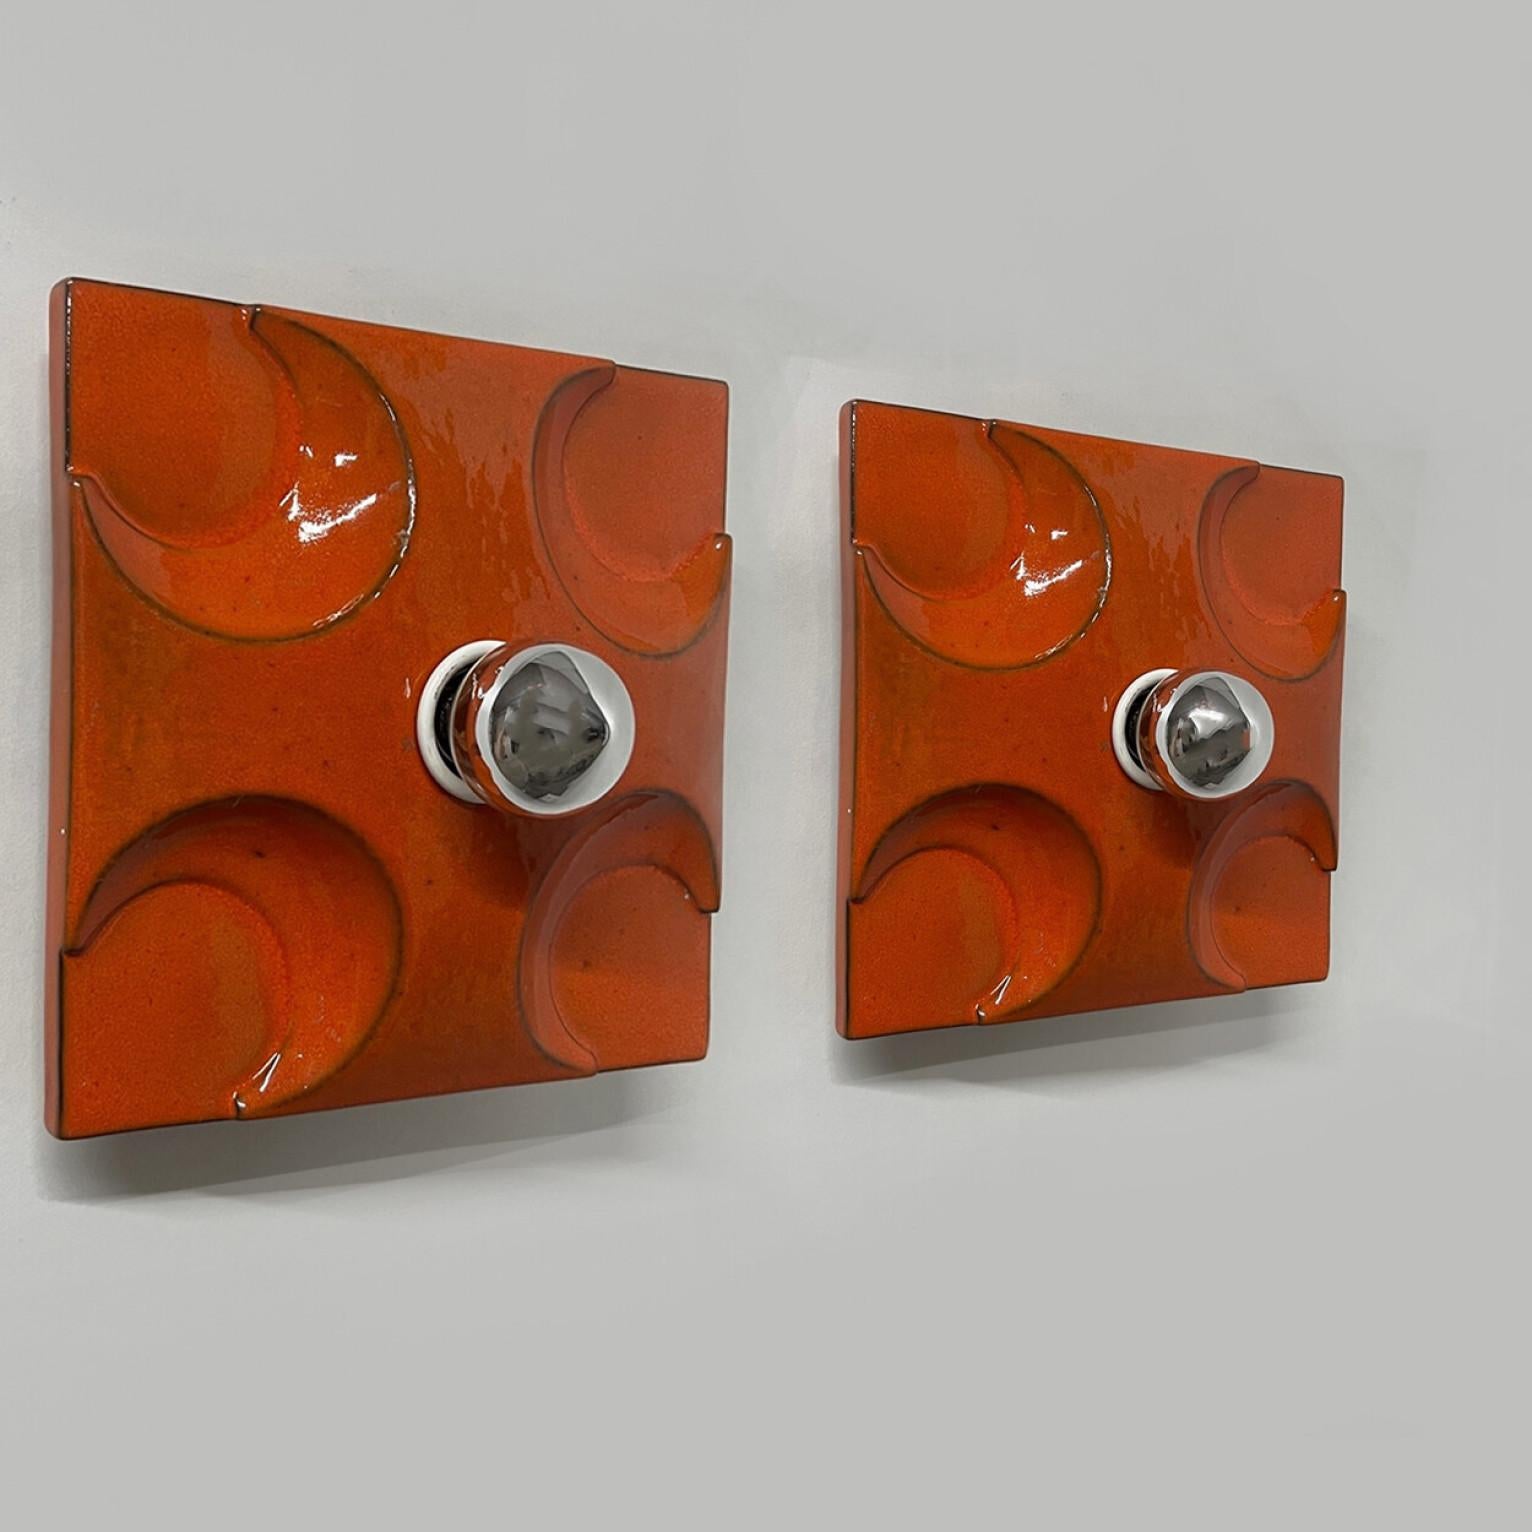 Space Age Pair of Orange Square Ceramic Wall Lights, Germany, 1970 For Sale